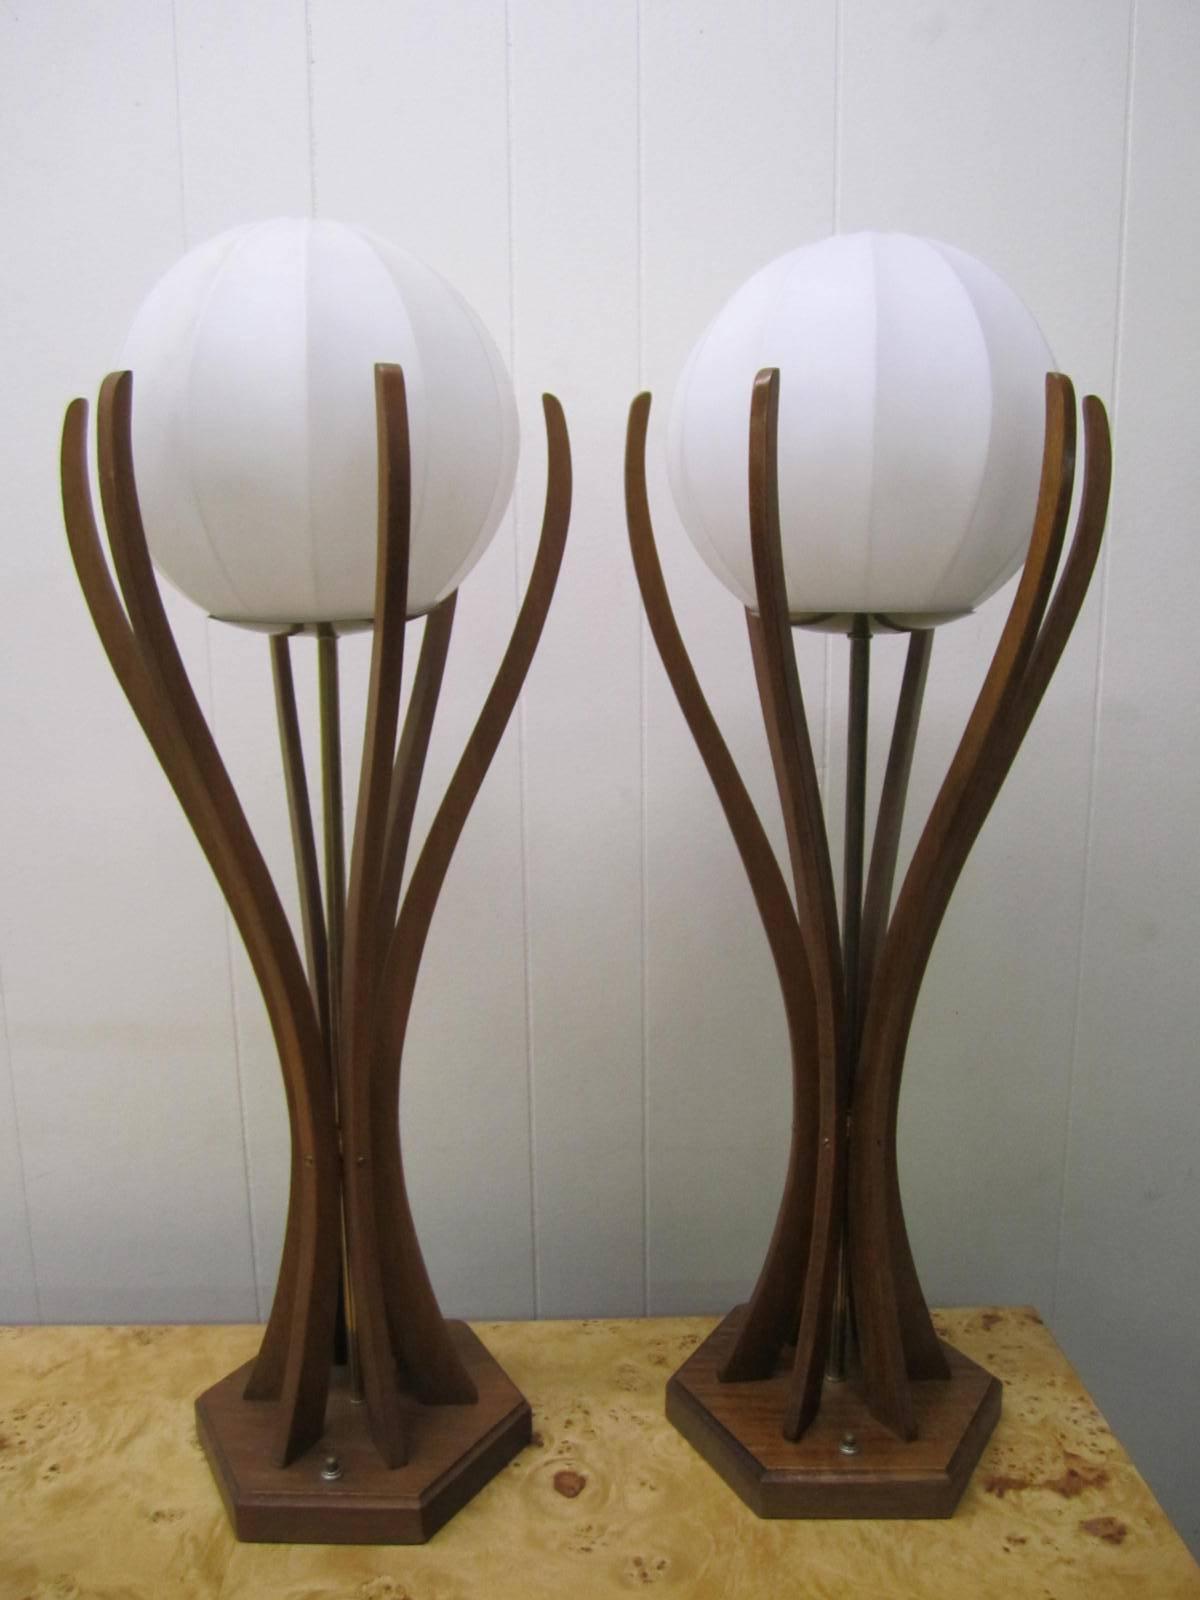 Excellent Pair of Danish Modern Sculptural Walnut Lamps Mid-Century Modern For Sale 4